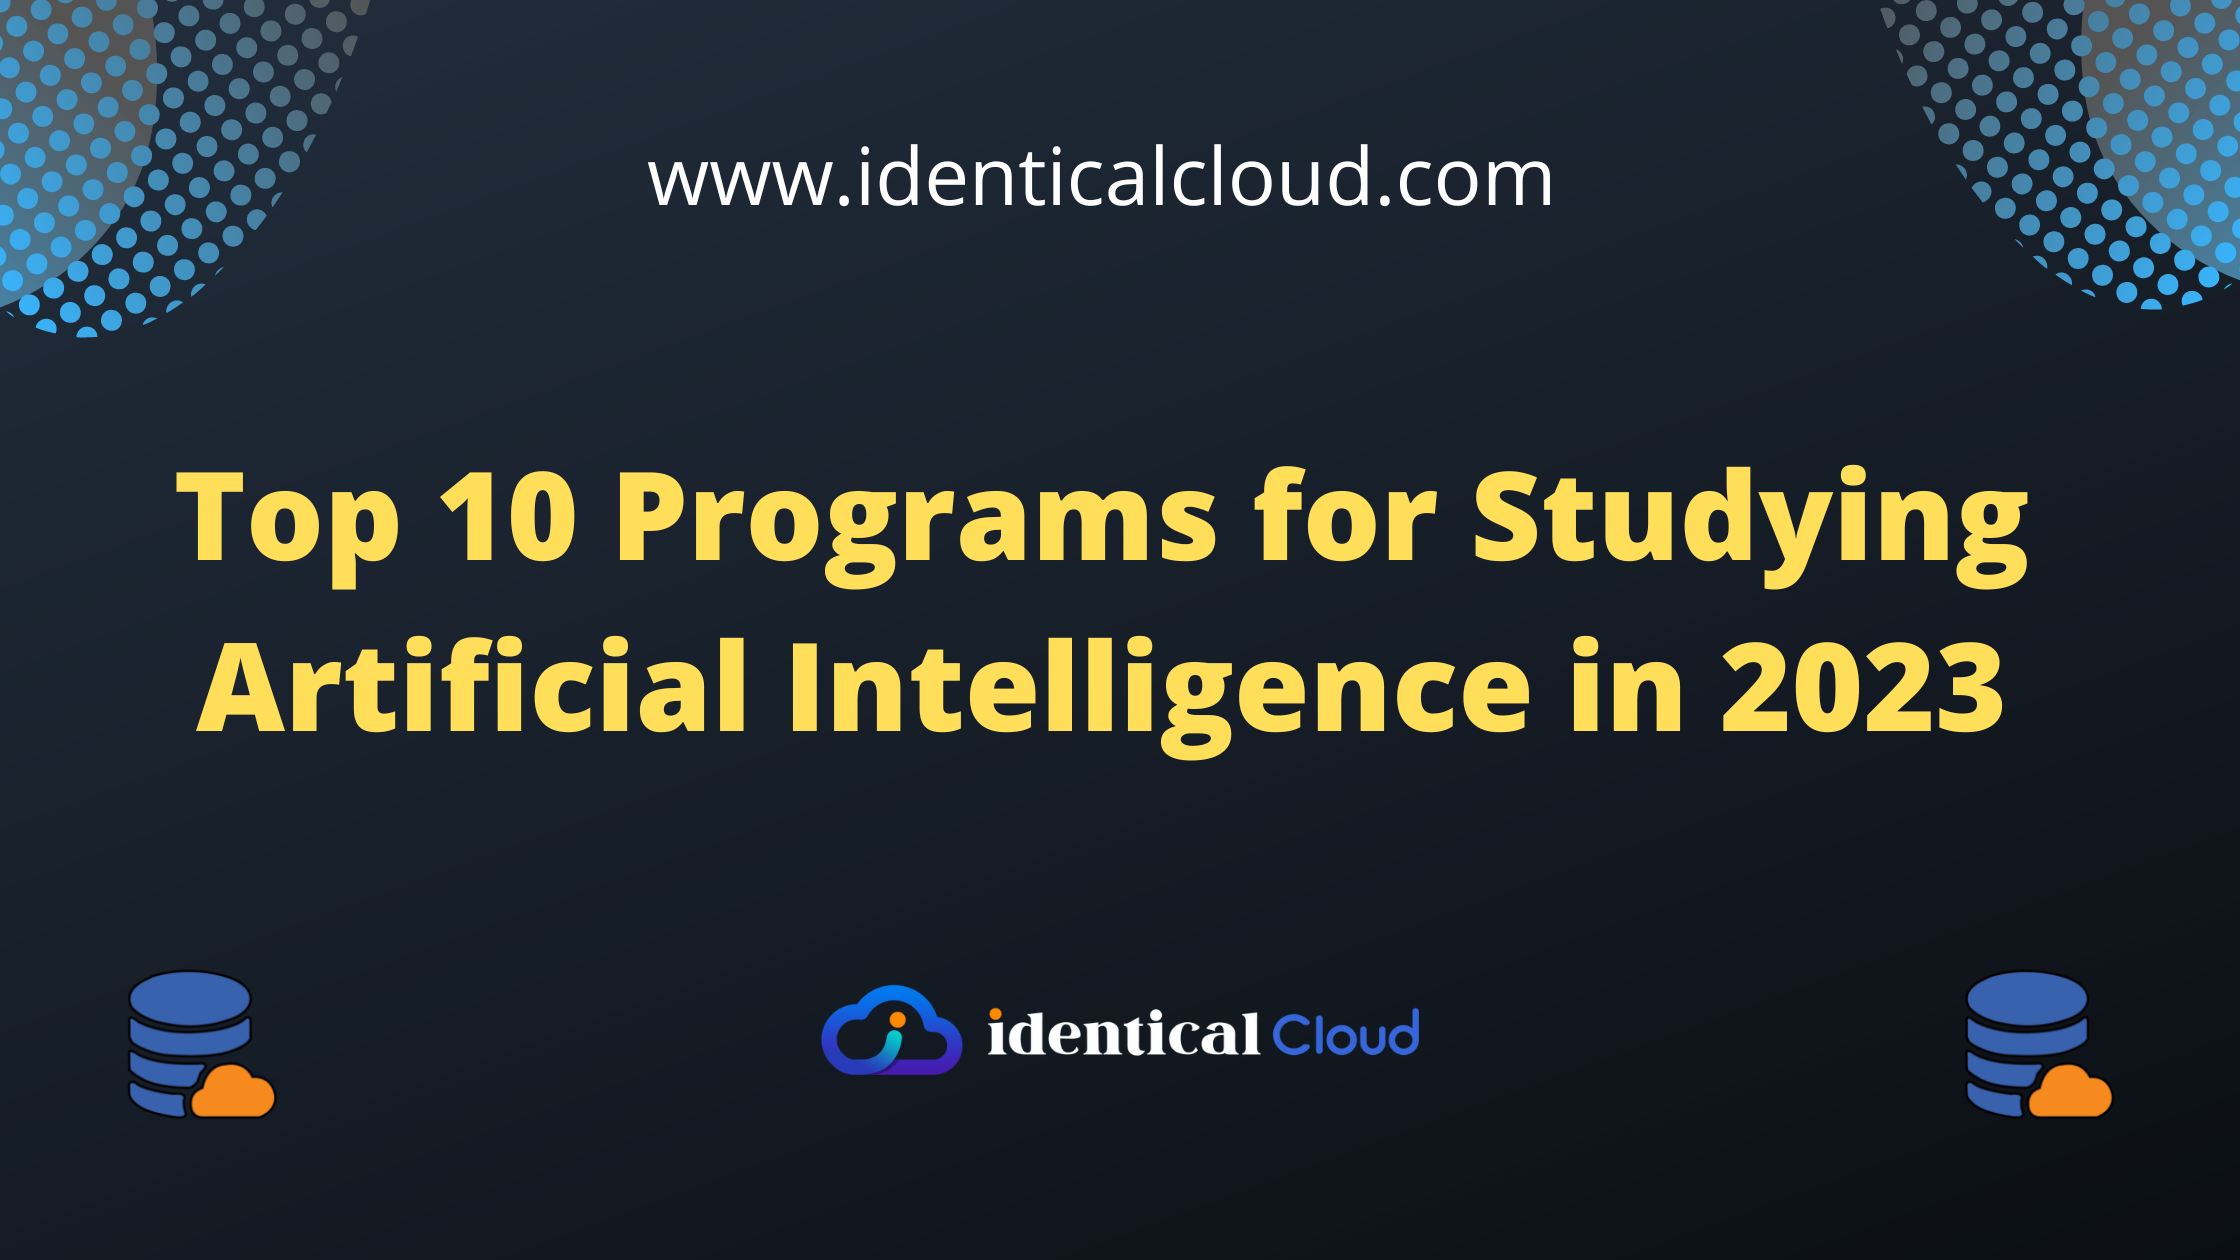 Top 10 Programs for Studying Artificial Intelligence in 2023 - identicalcloud.com